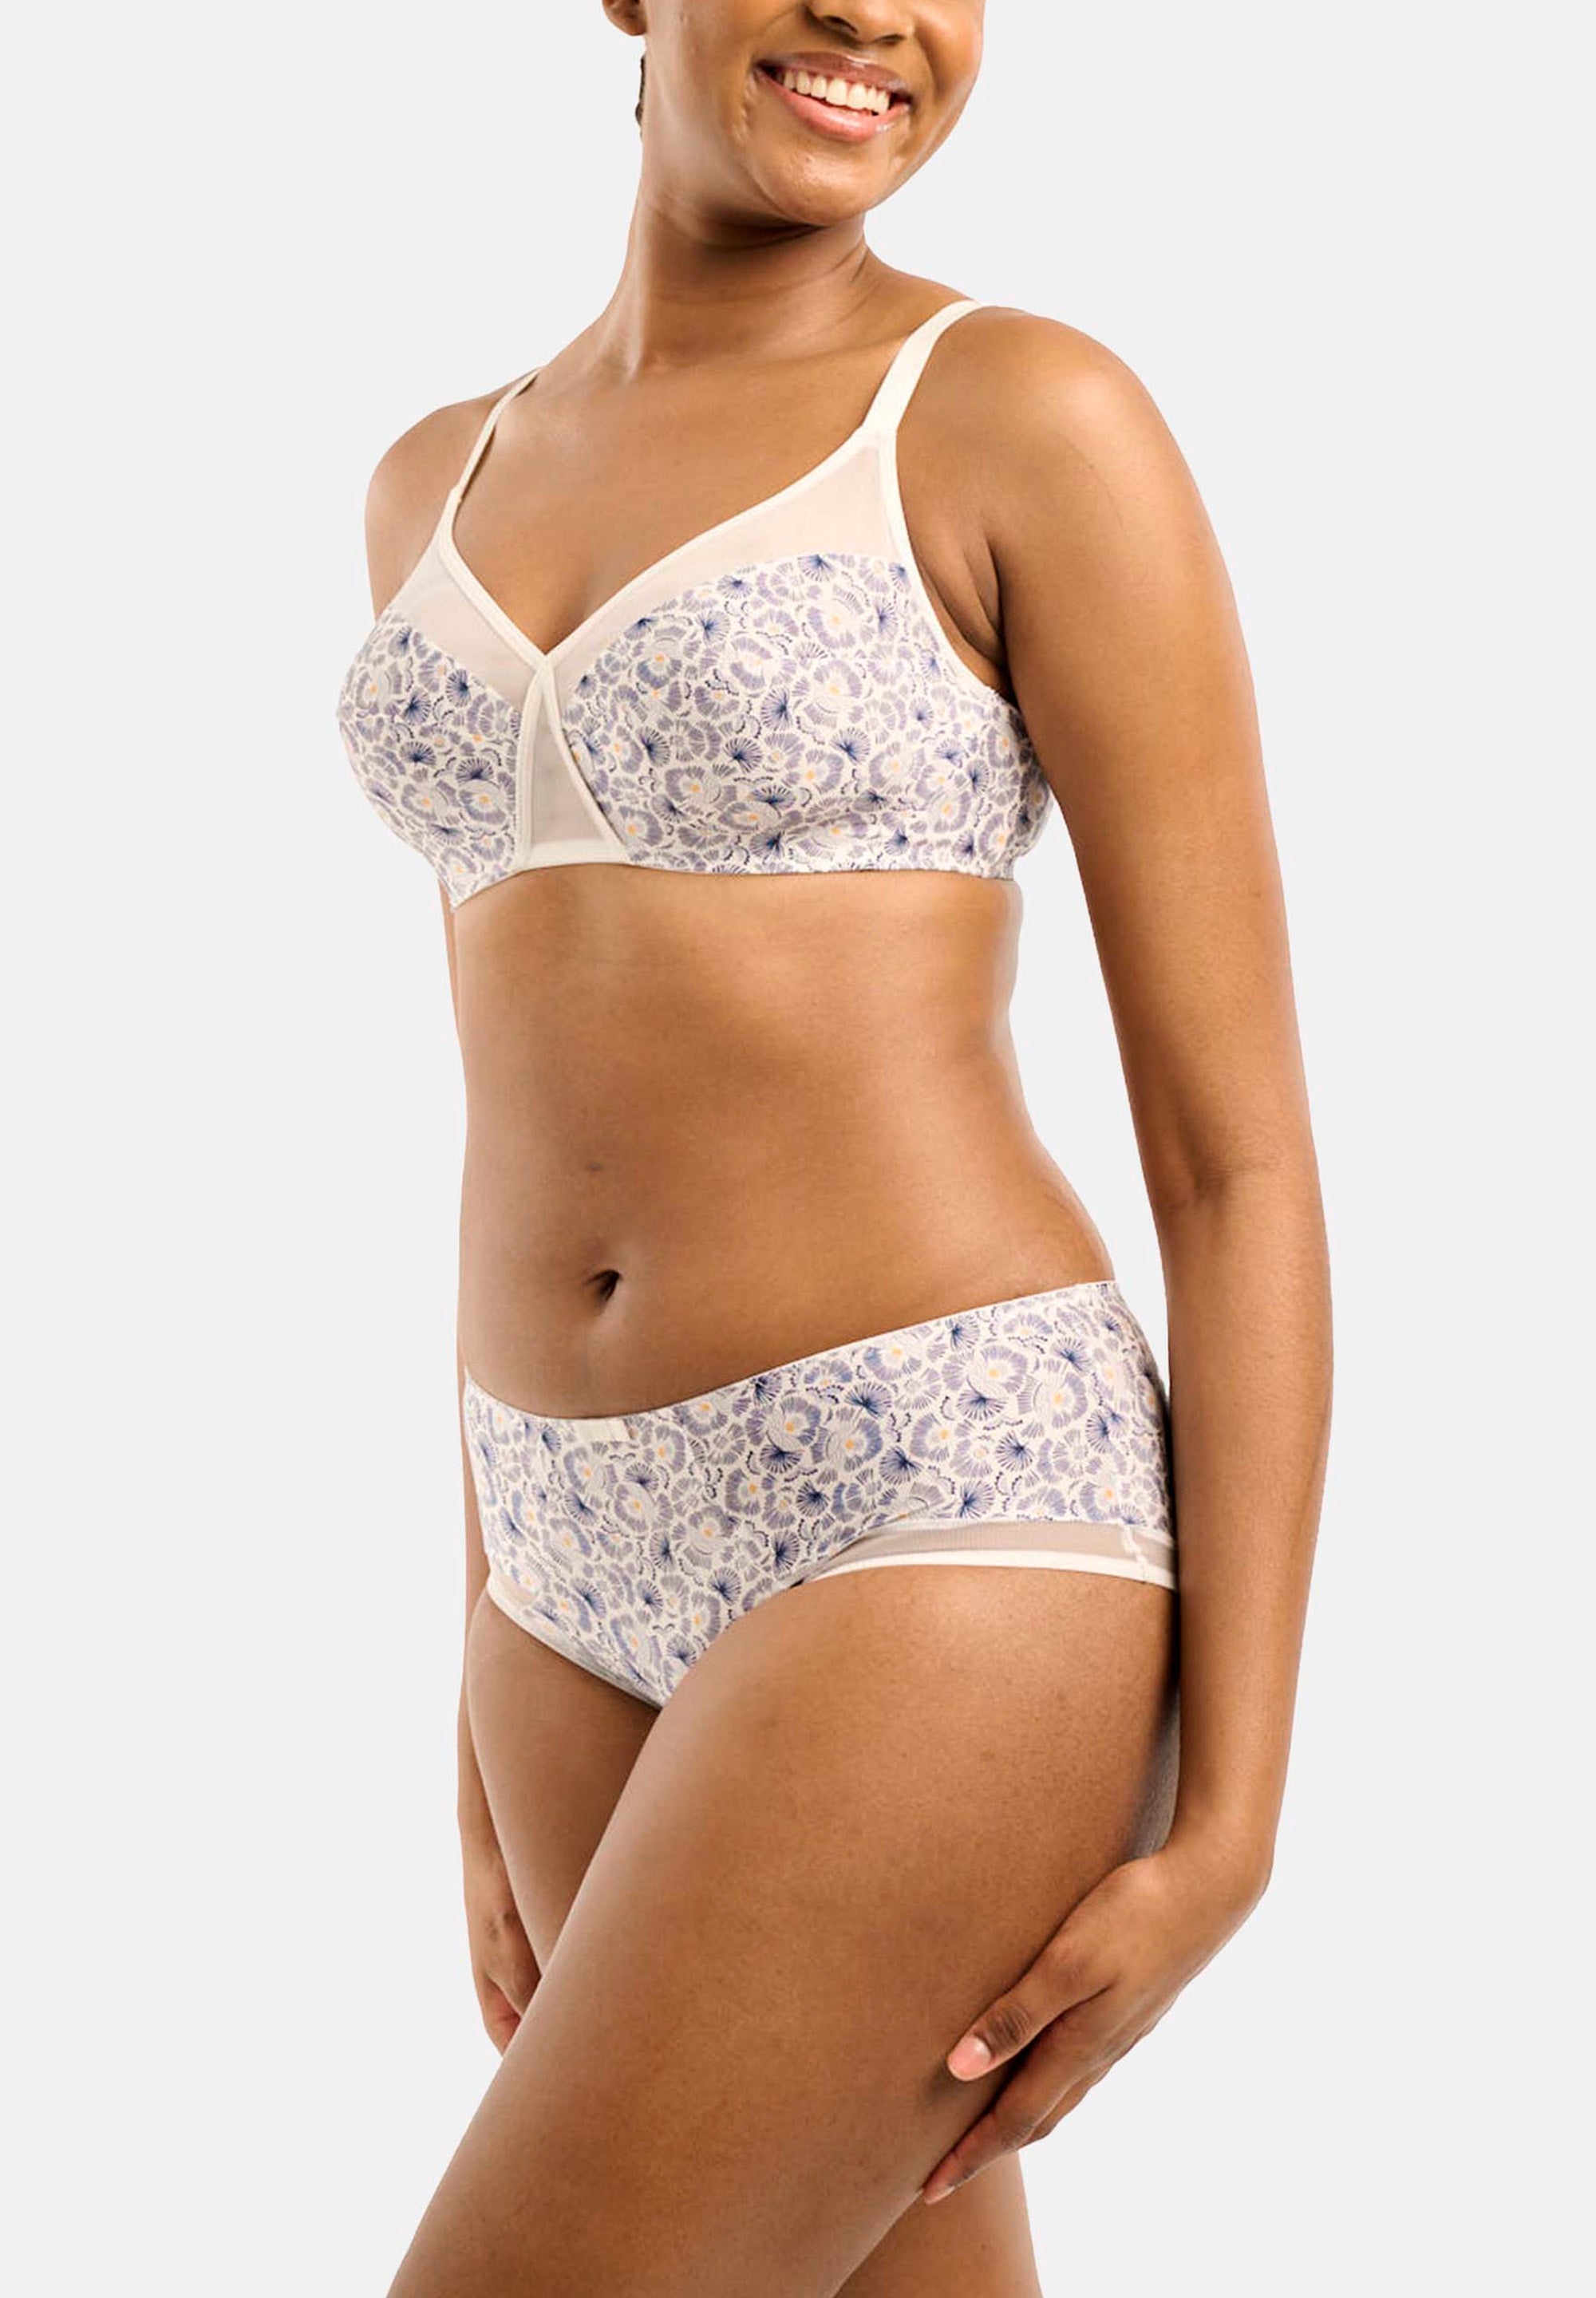 Underwired full cup bra Complice Floral Print Ivory / Blue